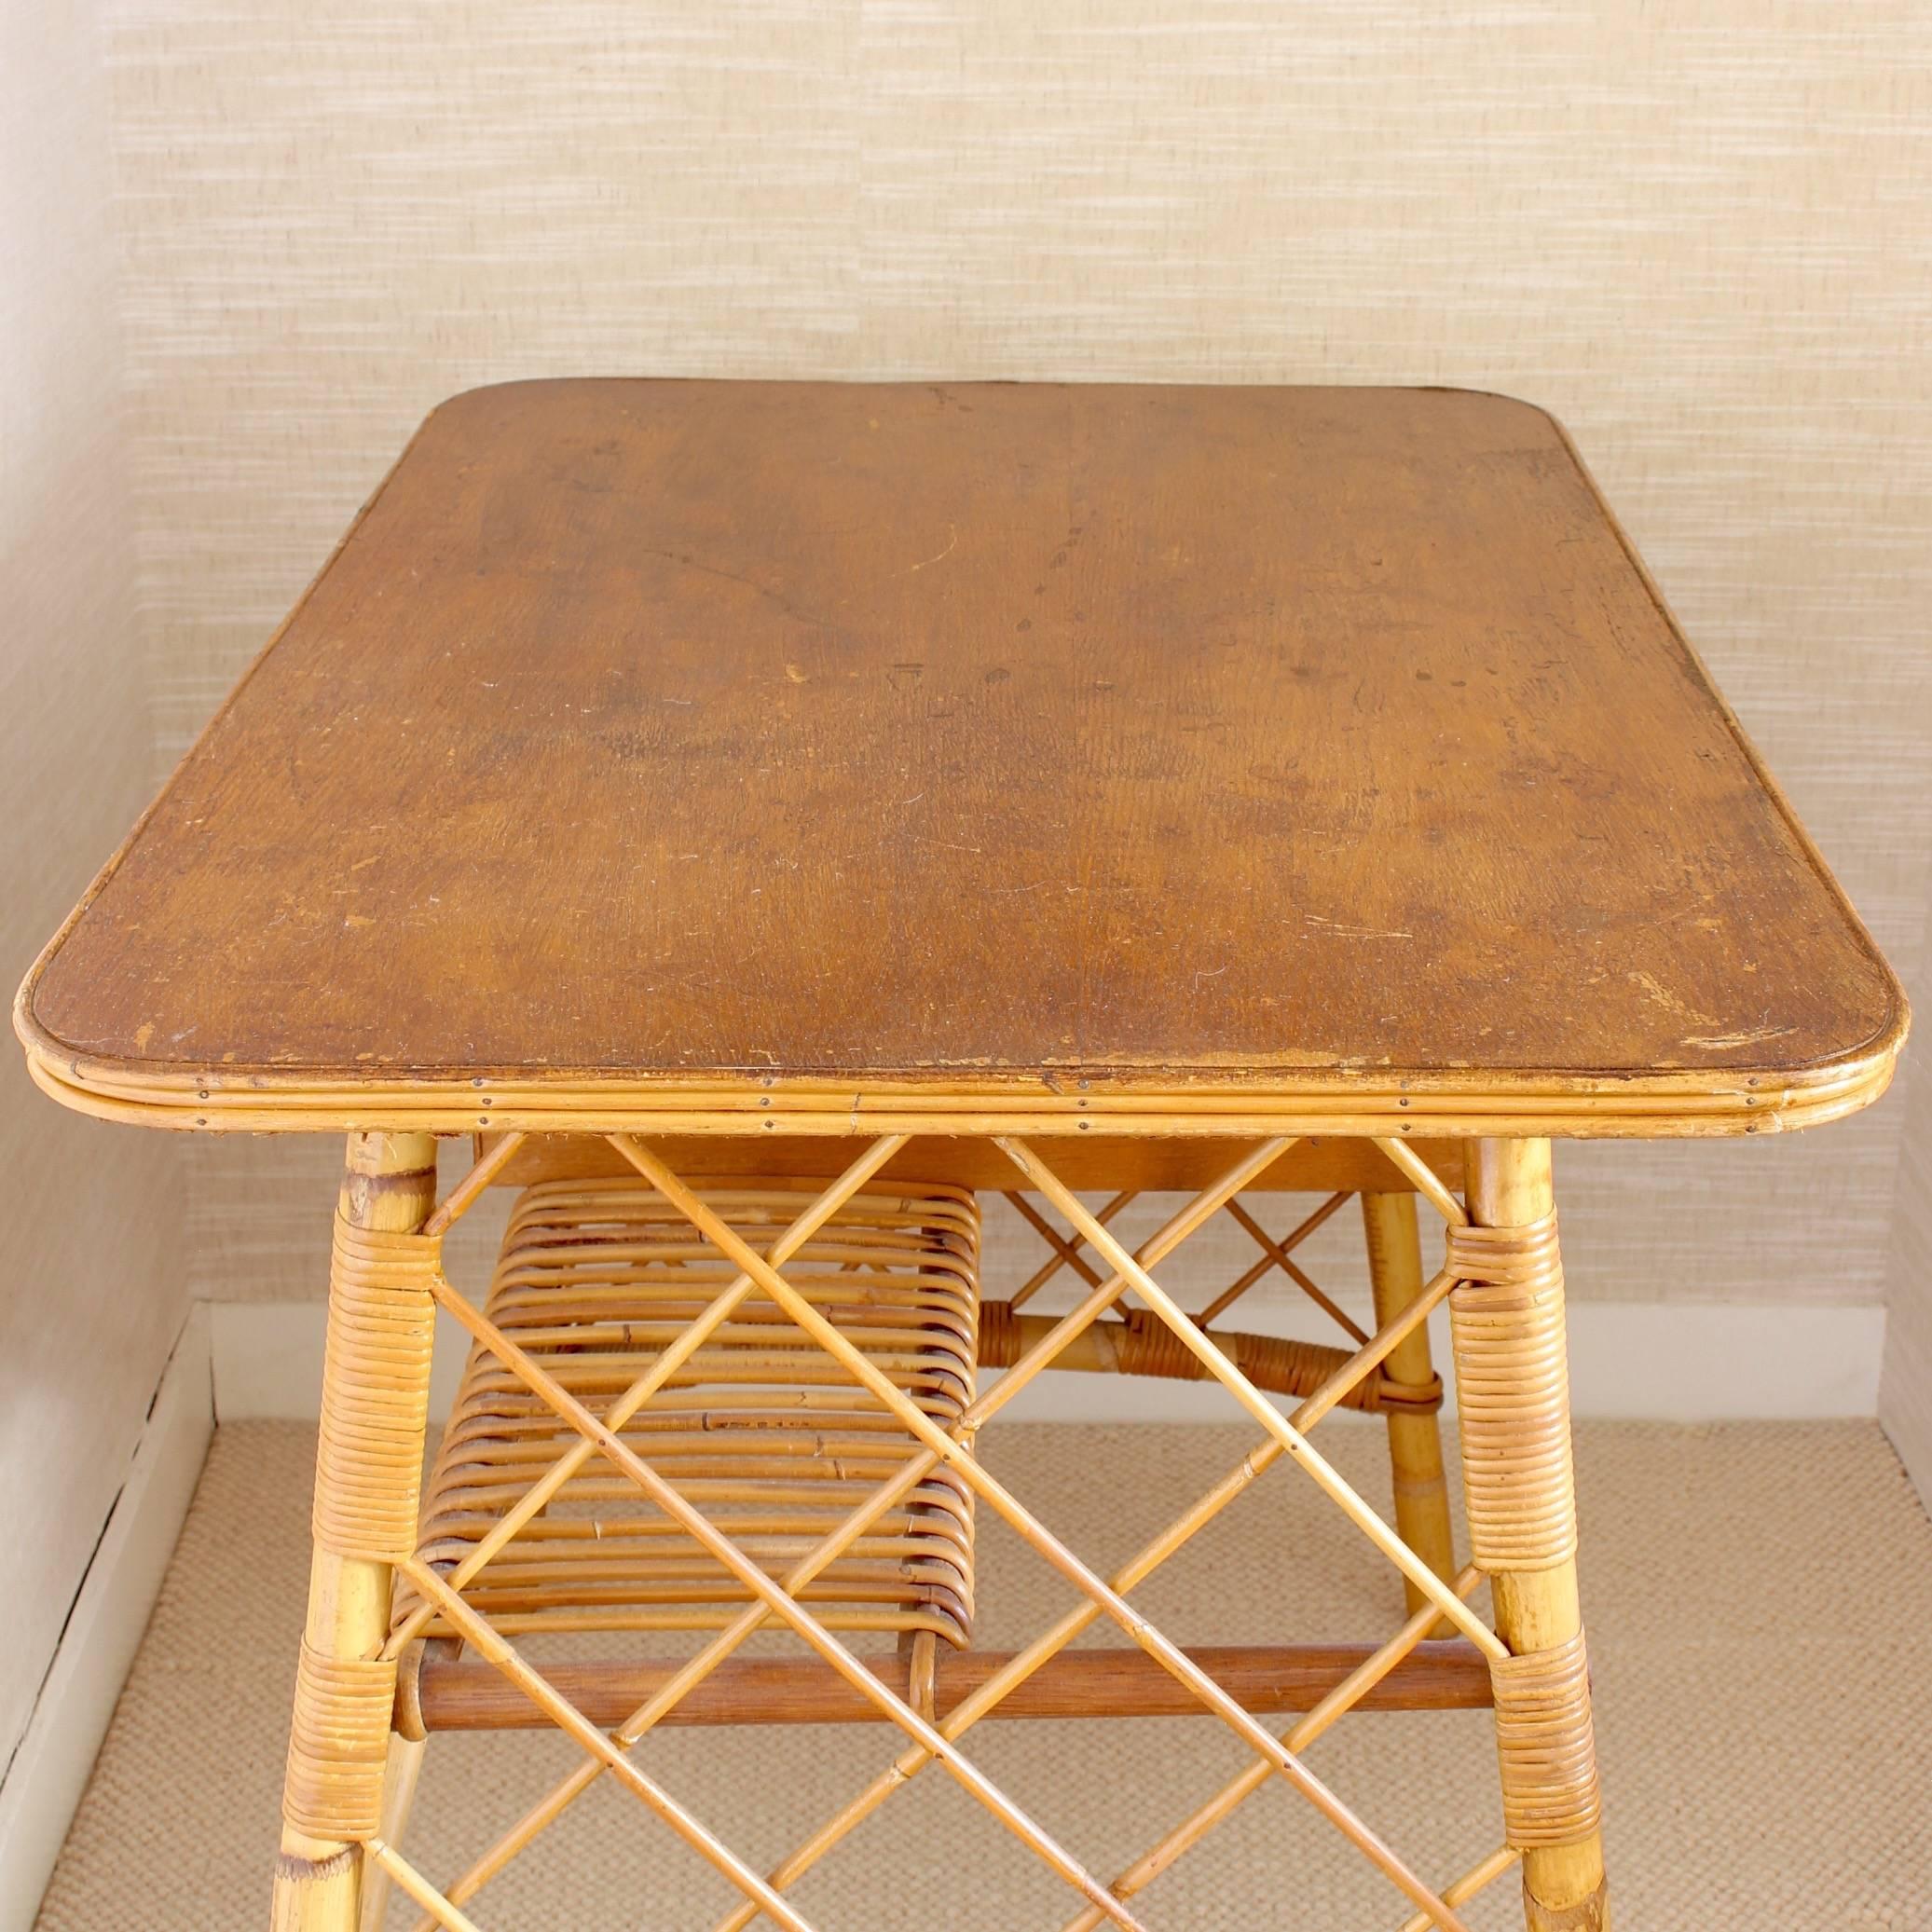 Mid-20th Century Rattan Desk or Vanity Table by Louis Sognot, circa 1950s